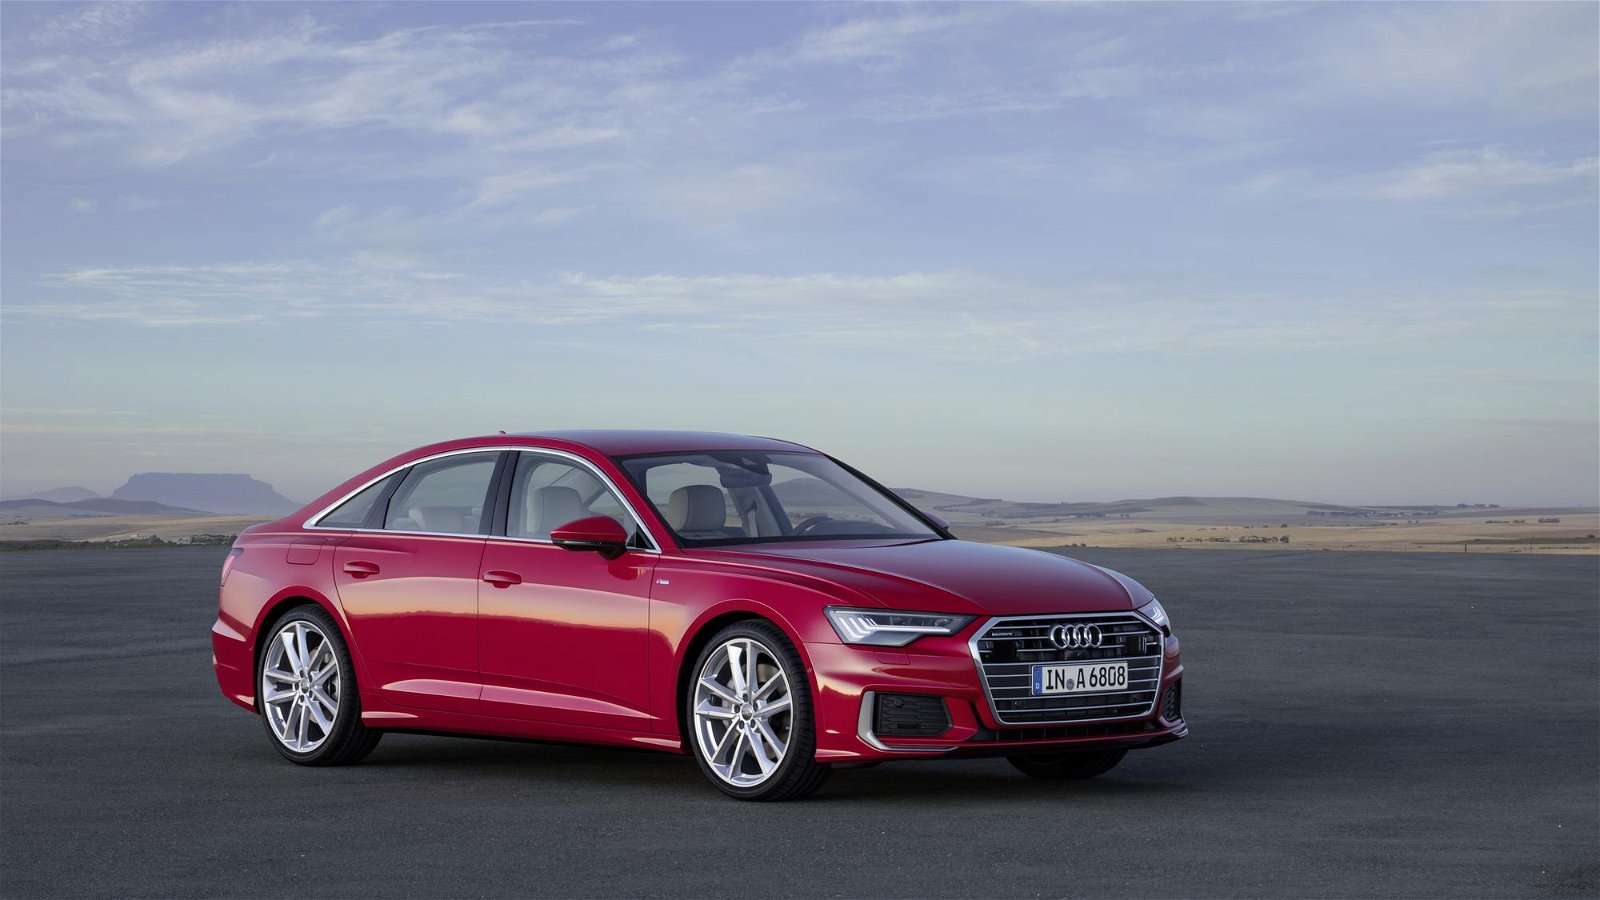 2019 Audi A6 C8 official pictures 09